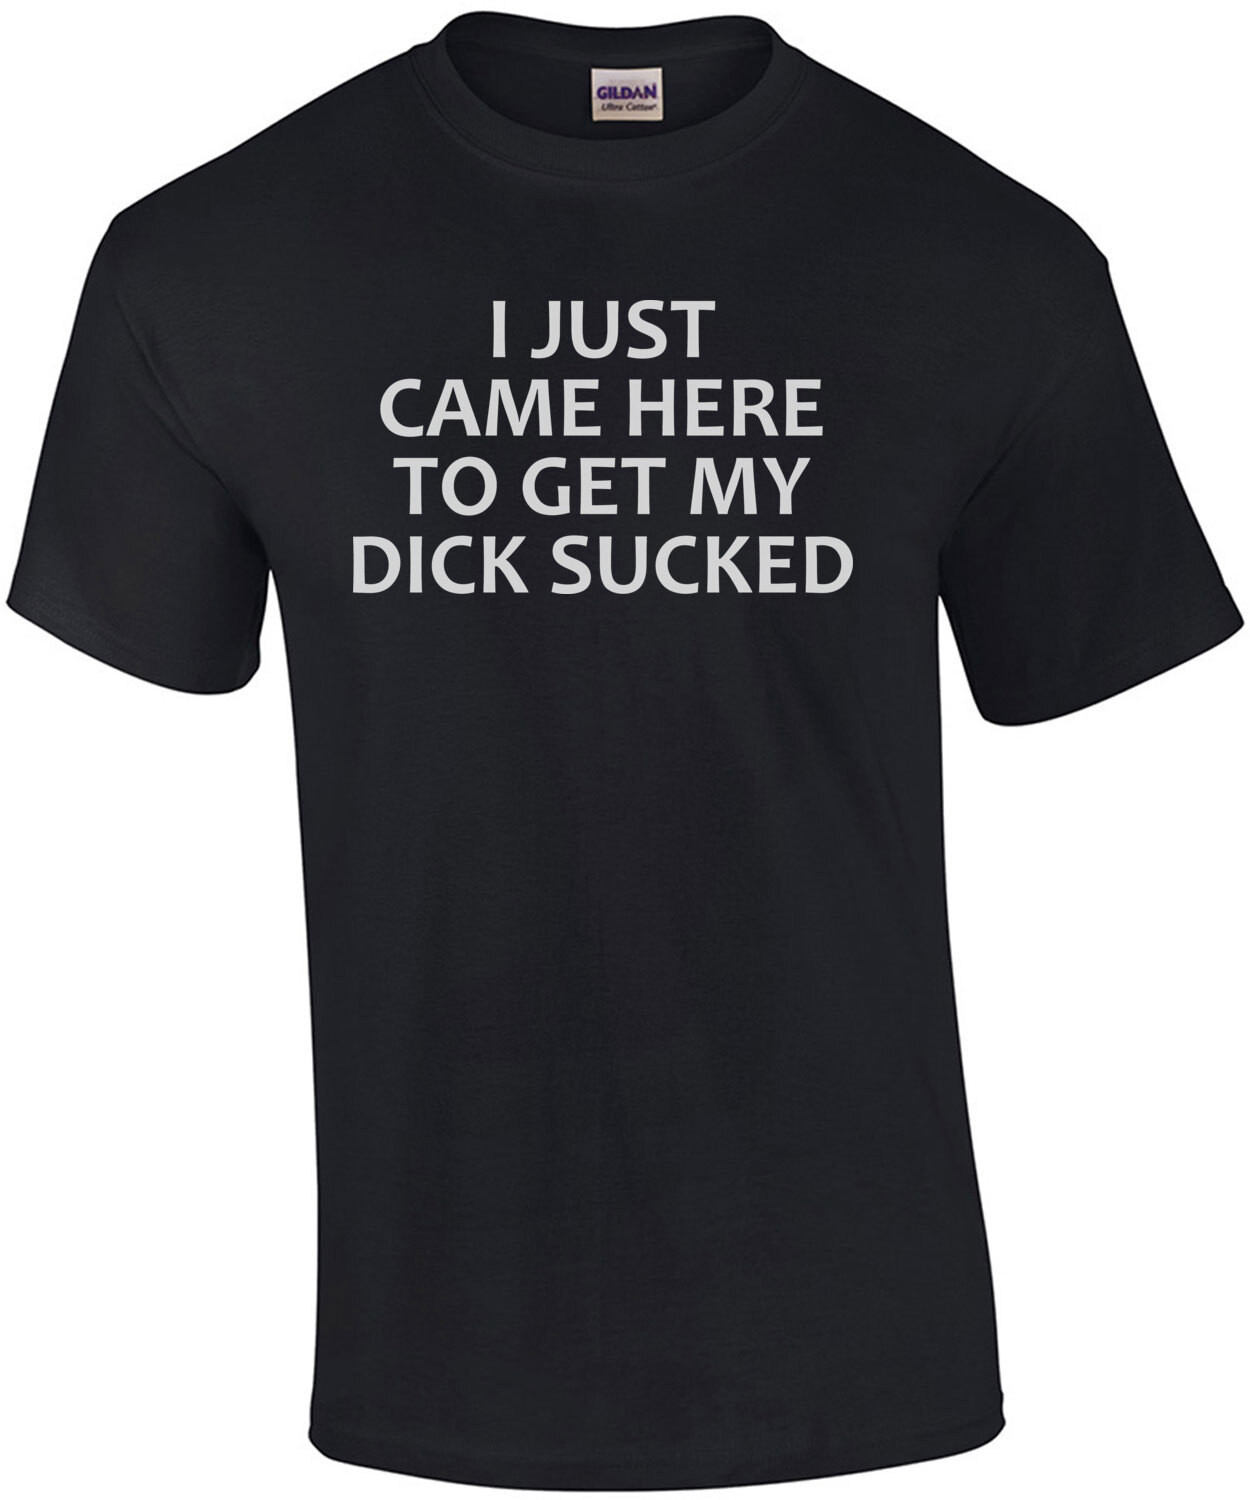 I just came here to get my dick sucked - funny offensive sexual t-shirt